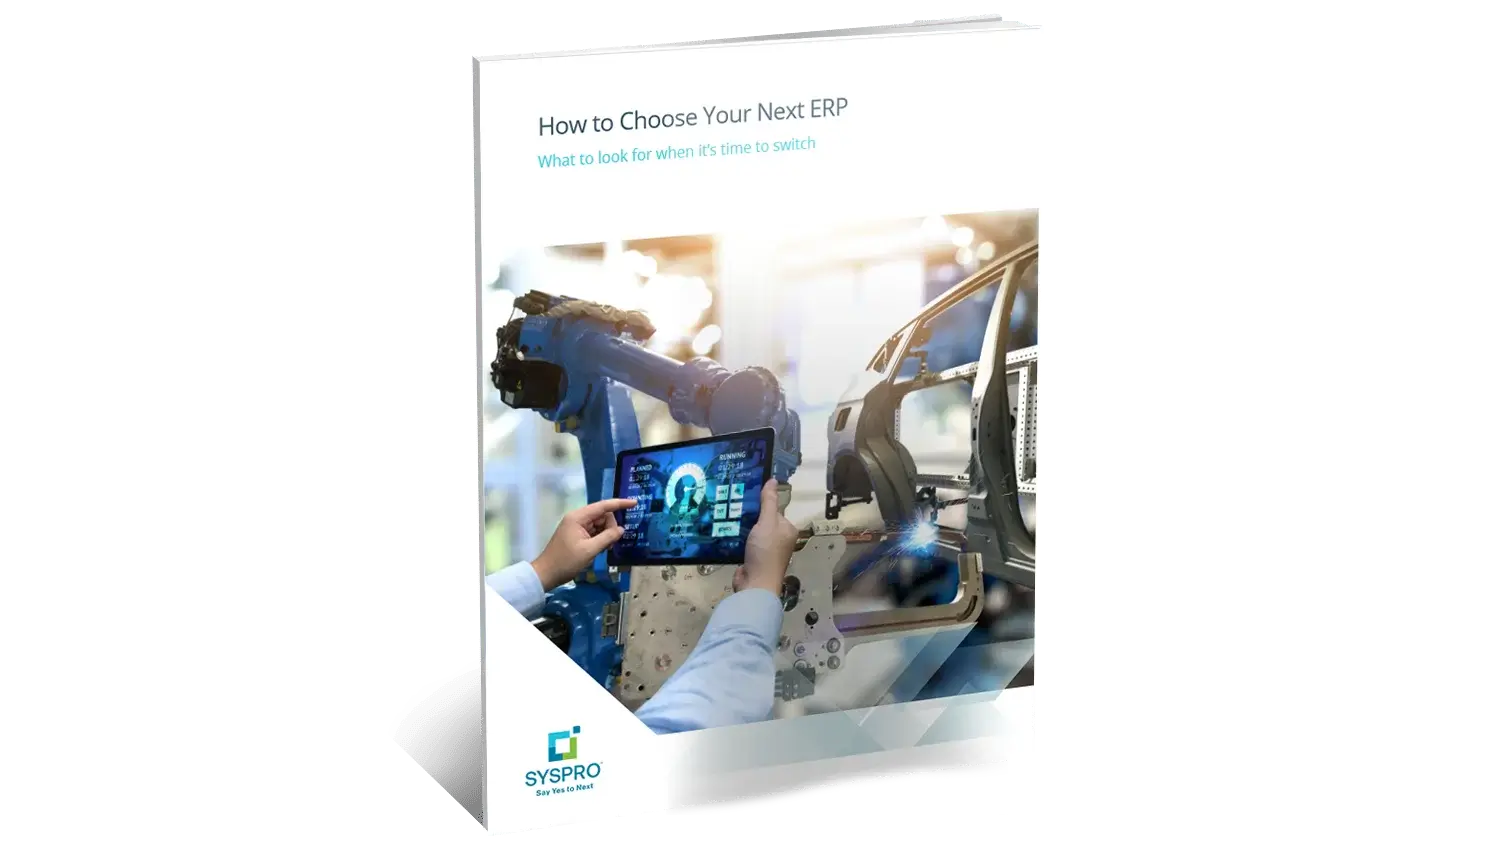 Whitepaper: How to Choose Your Next ERP - SYSPRO ERP Software